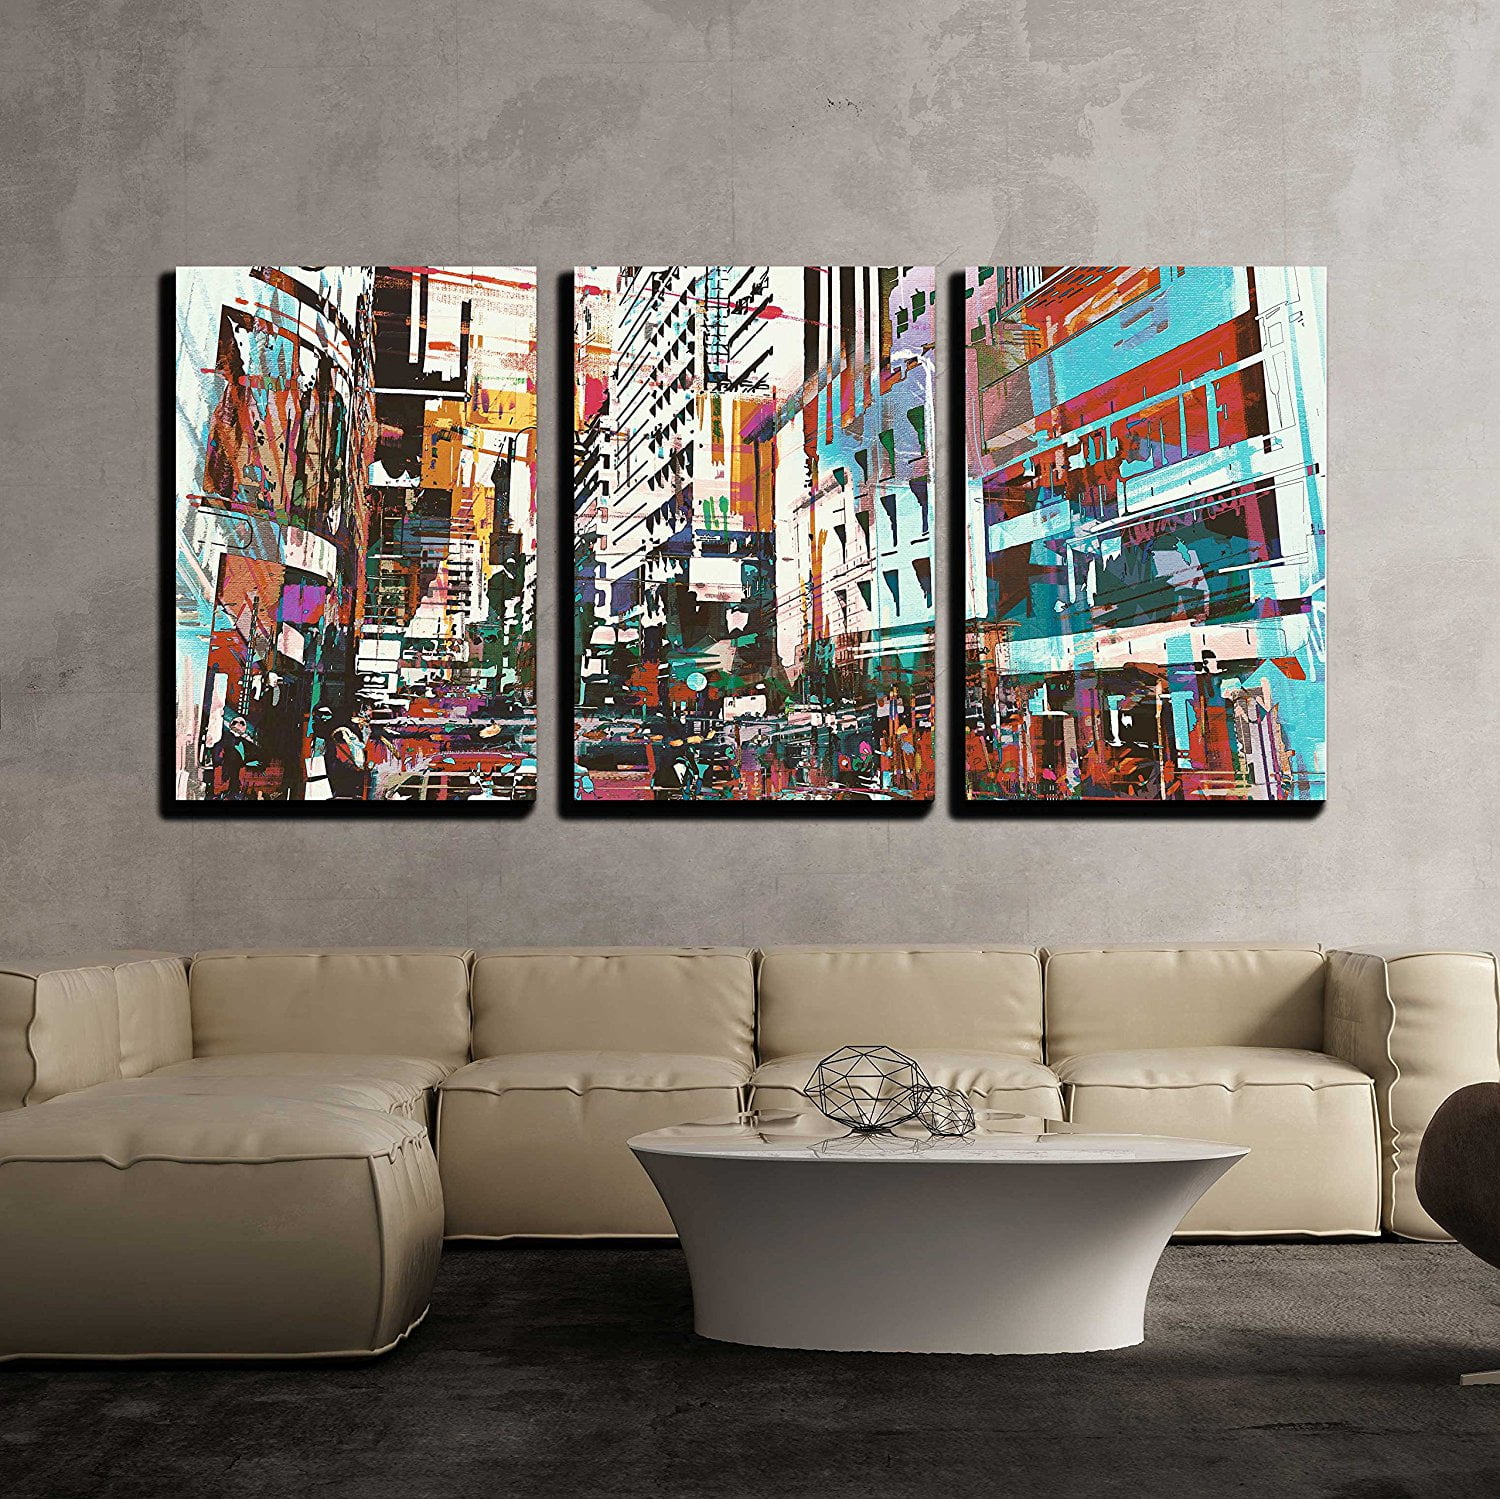 Wall26 3 Piece Canvas Wall Art - Illustration - Abstract Art of ...